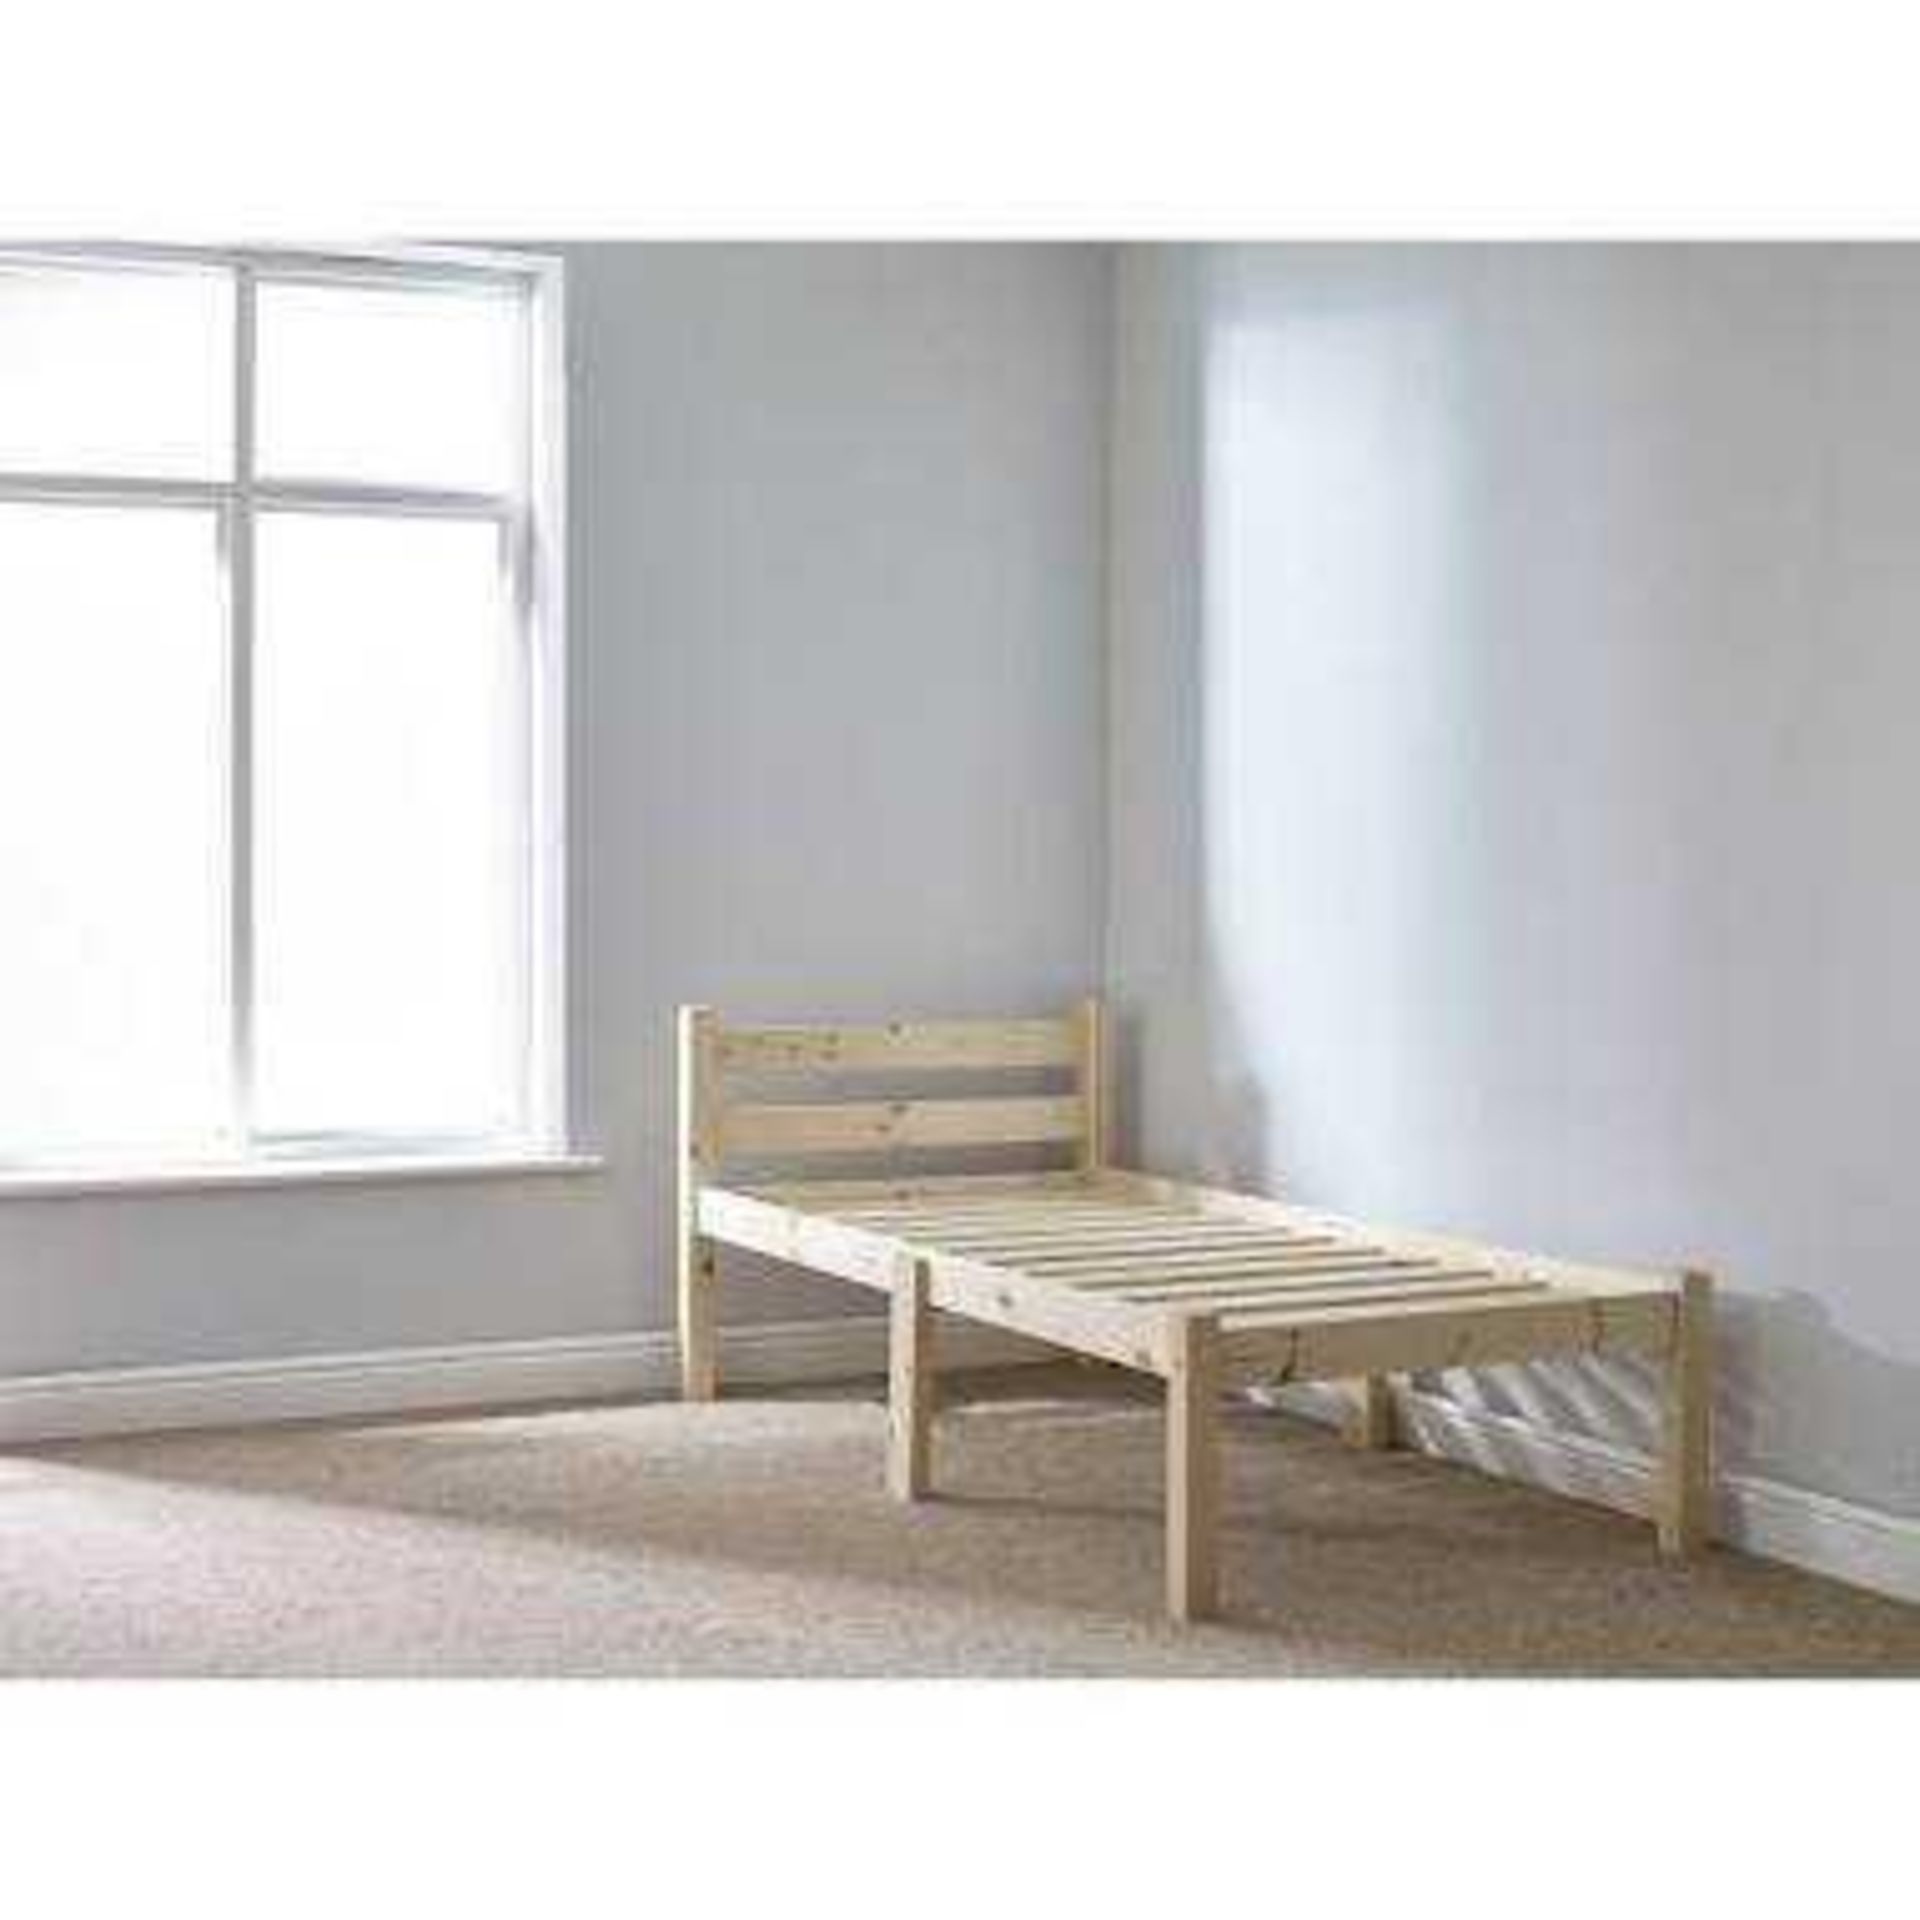 RRP £130 Boxed Wayfair Essex Bed Frame Small Single 2.6 - Image 2 of 2